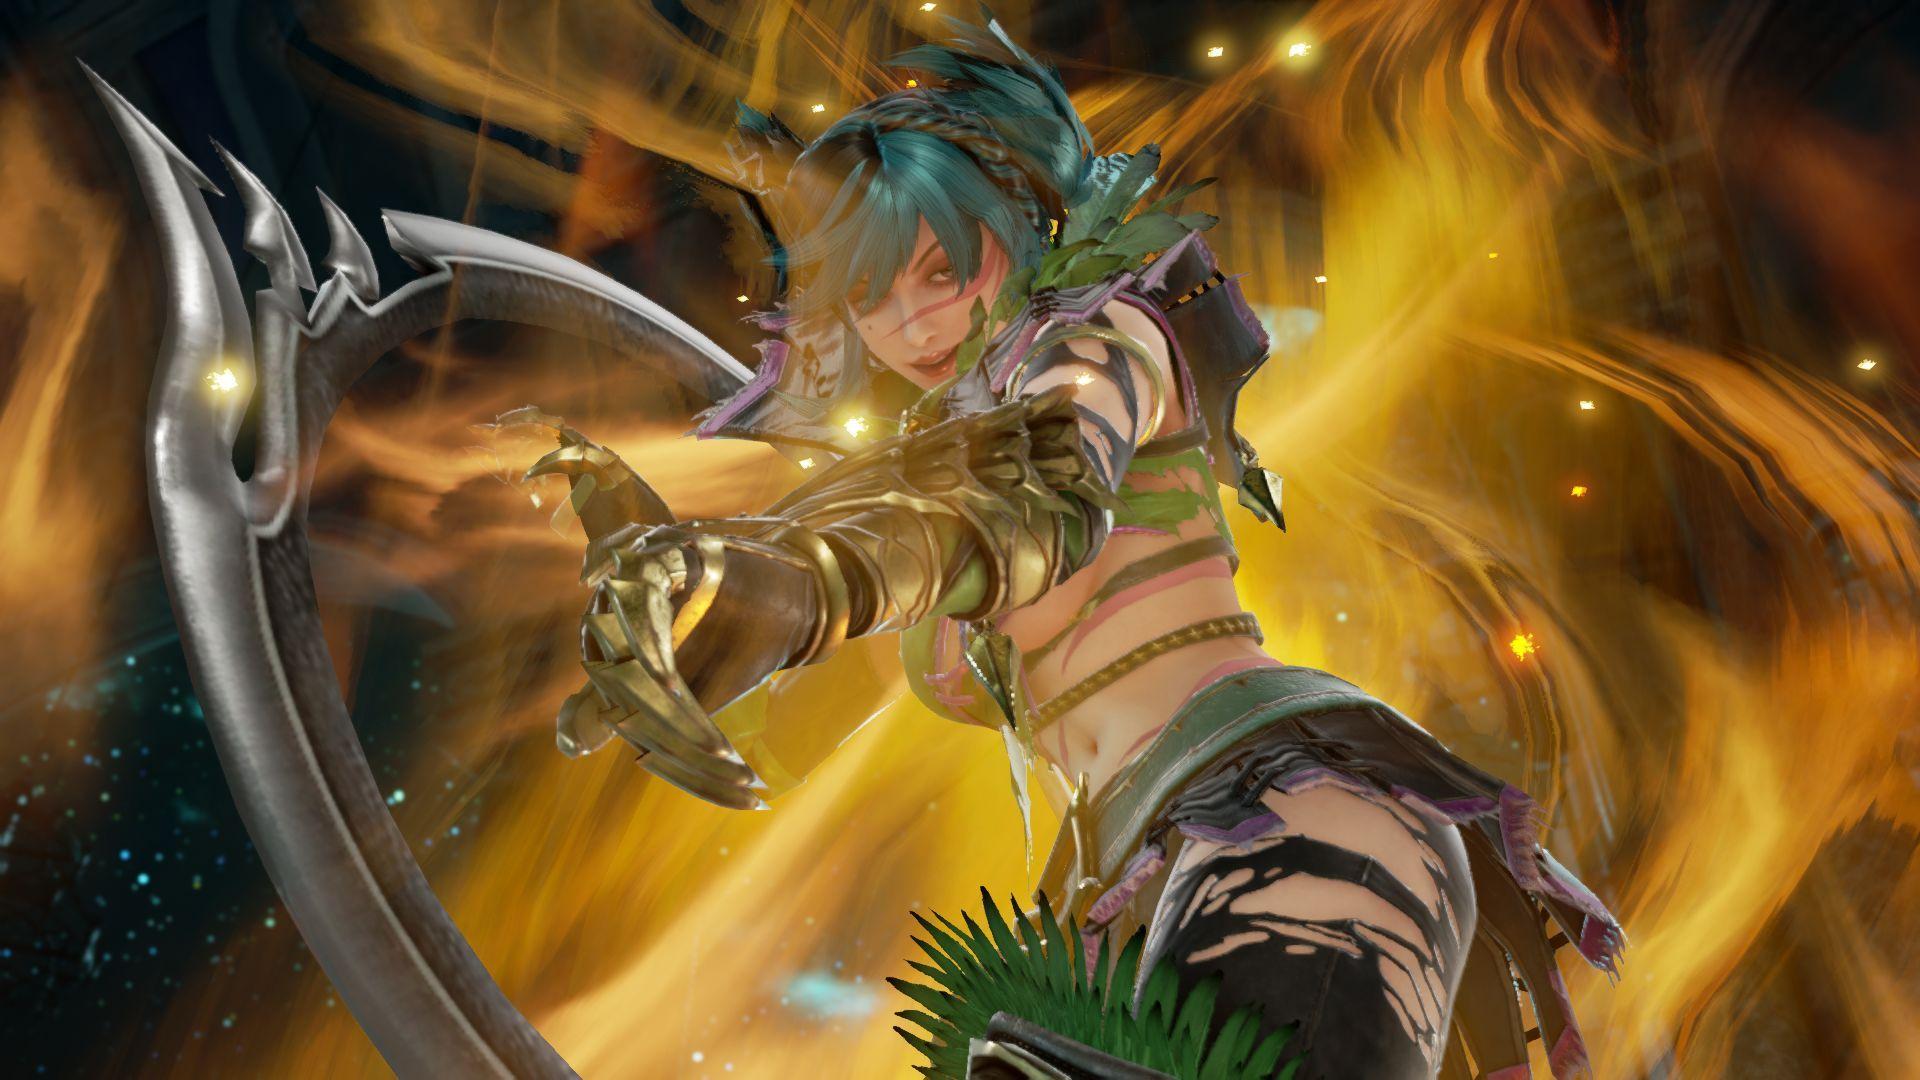 So Why Is Tira a DLC Character in SoulCalibur VI? A Producer Sheds